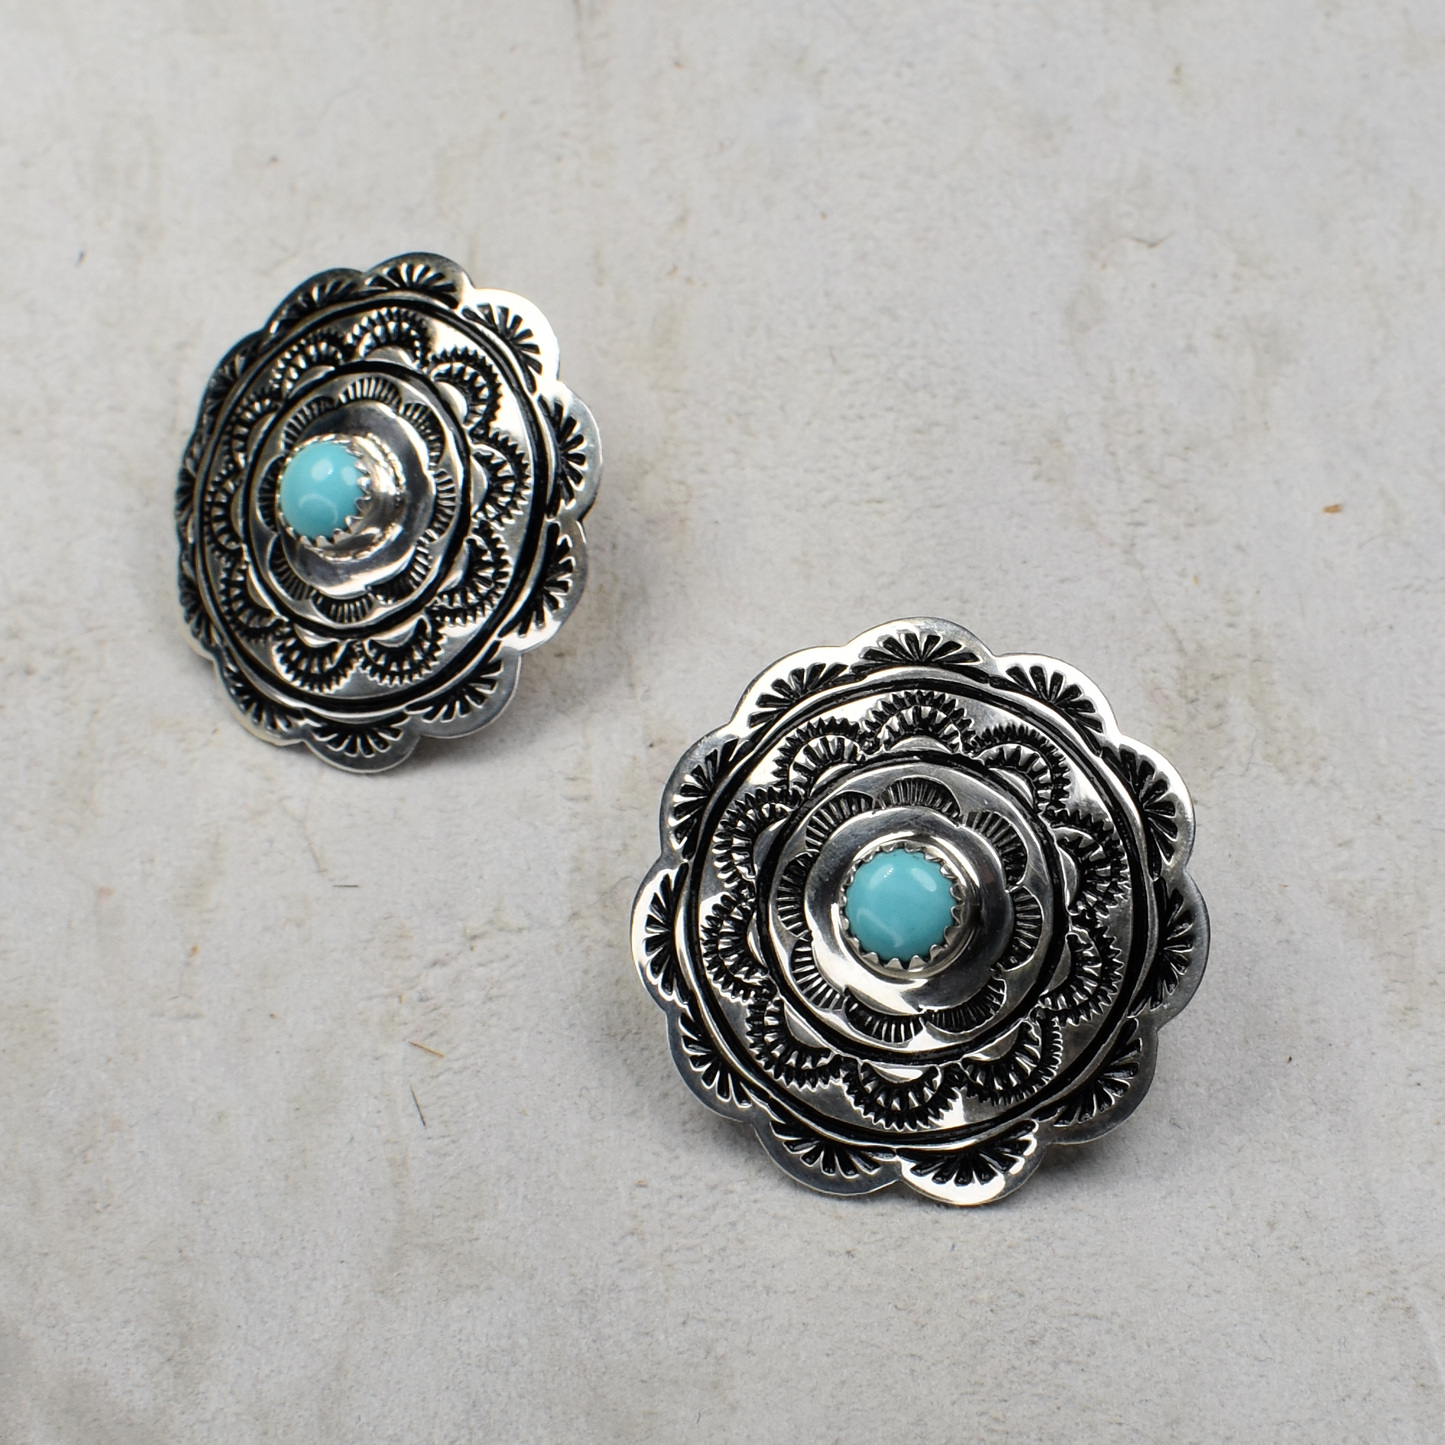 Hand-Stamped Concho Earrings with Sleeping Beauty Turquoise Inlay by Emily Arviso